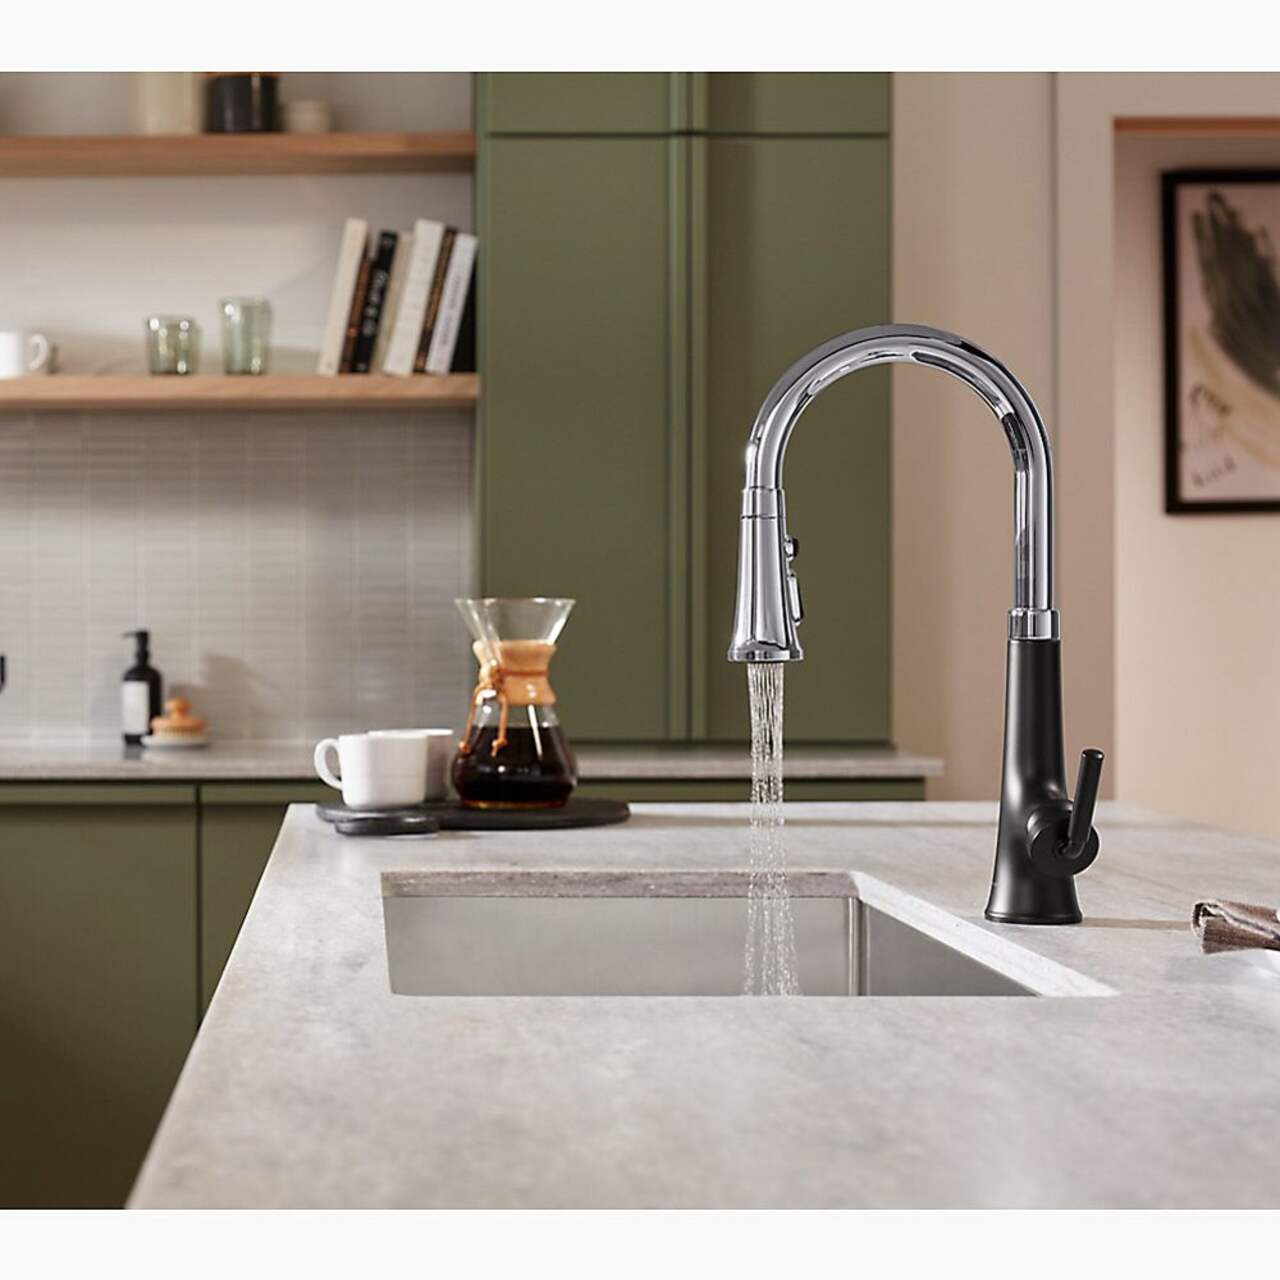 https://media-www.canadiantire.ca/product/fixing/plumbing/faucets-fixtures/7747375/kohler-tone-kitchen-faucet-matte-black-chrome-541764dd-9e6c-4c25-bf12-d51a3eeefb38-jpgrendition.jpg?imdensity=1&imwidth=1244&impolicy=mZoom